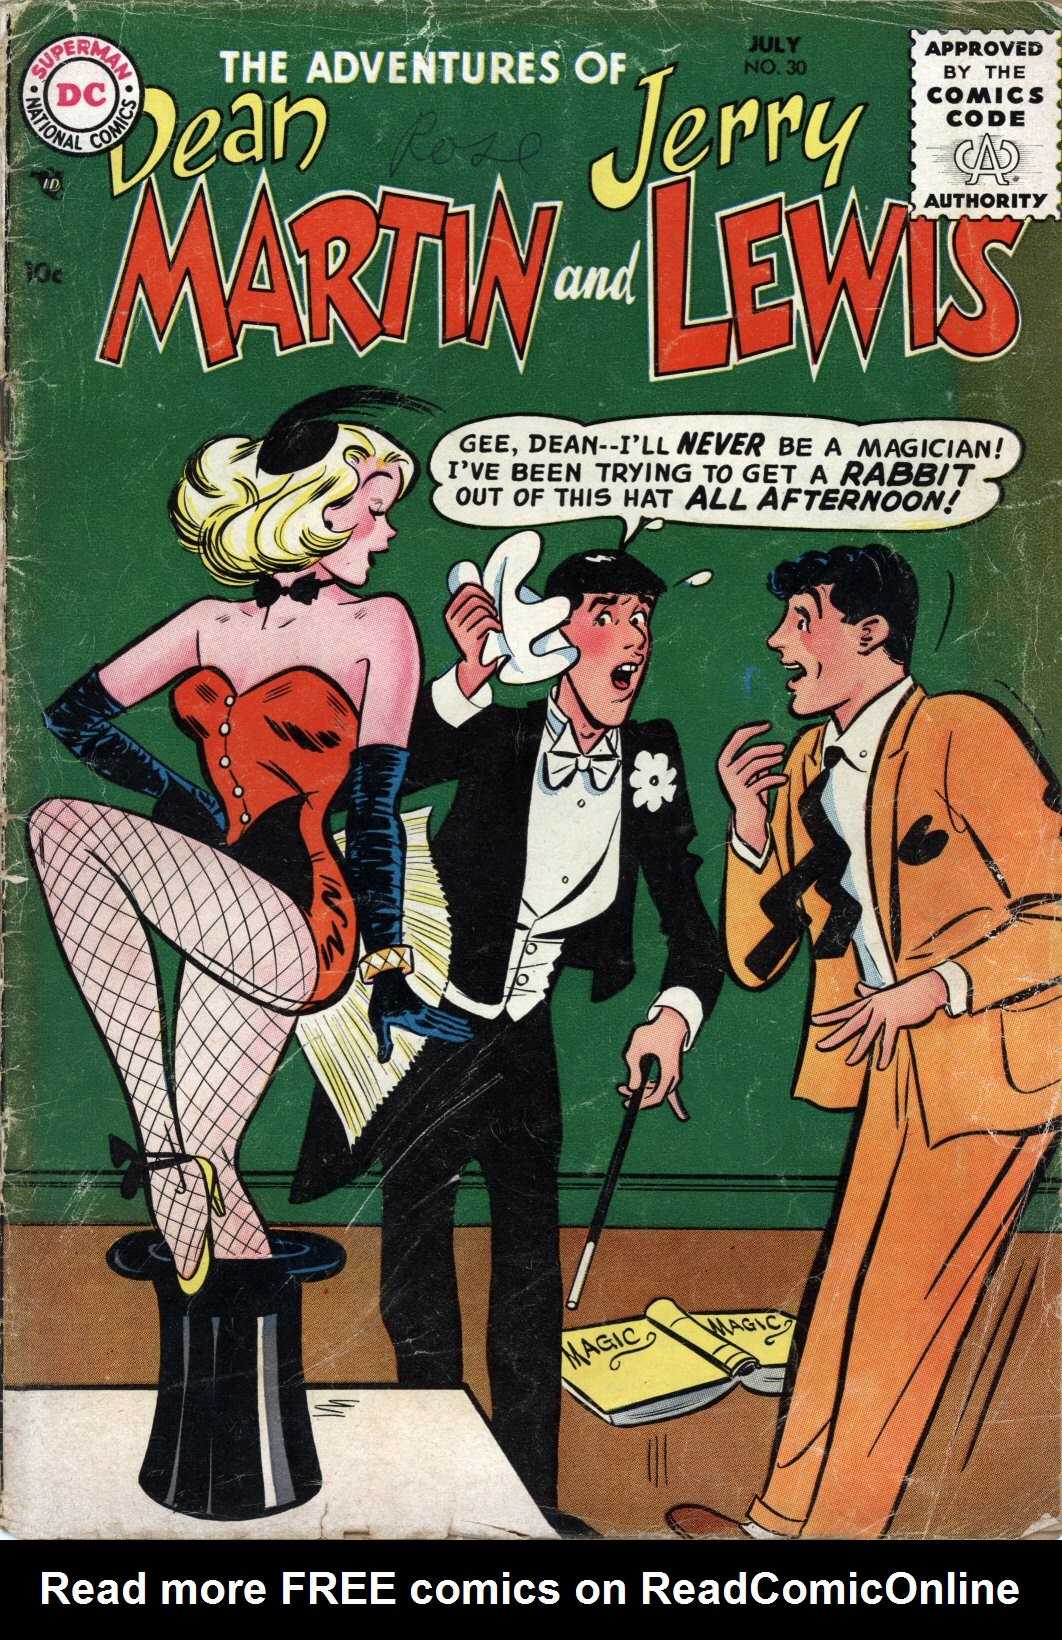 Read online The Adventures of Dean Martin and Jerry Lewis comic -  Issue #30 - 1